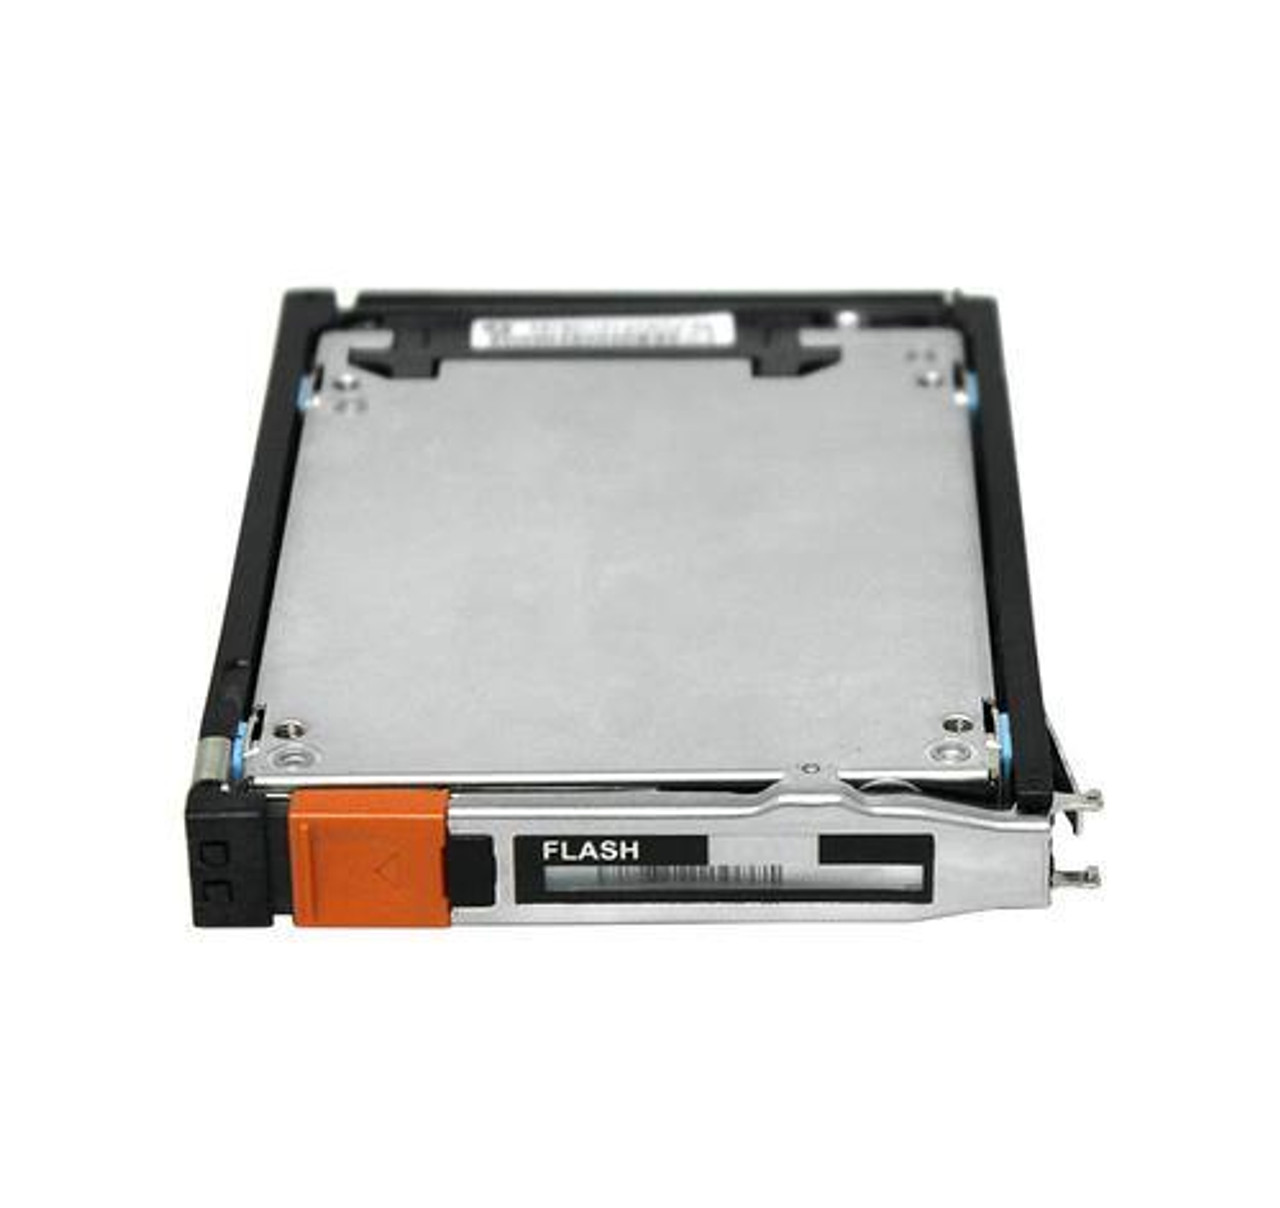 FLVX2S6F-200N EMC 200GB Fast Cache Flash 2.5-inch Internal Solid State Drive (SSD) for VNX 25 x 2.5 Enclosure